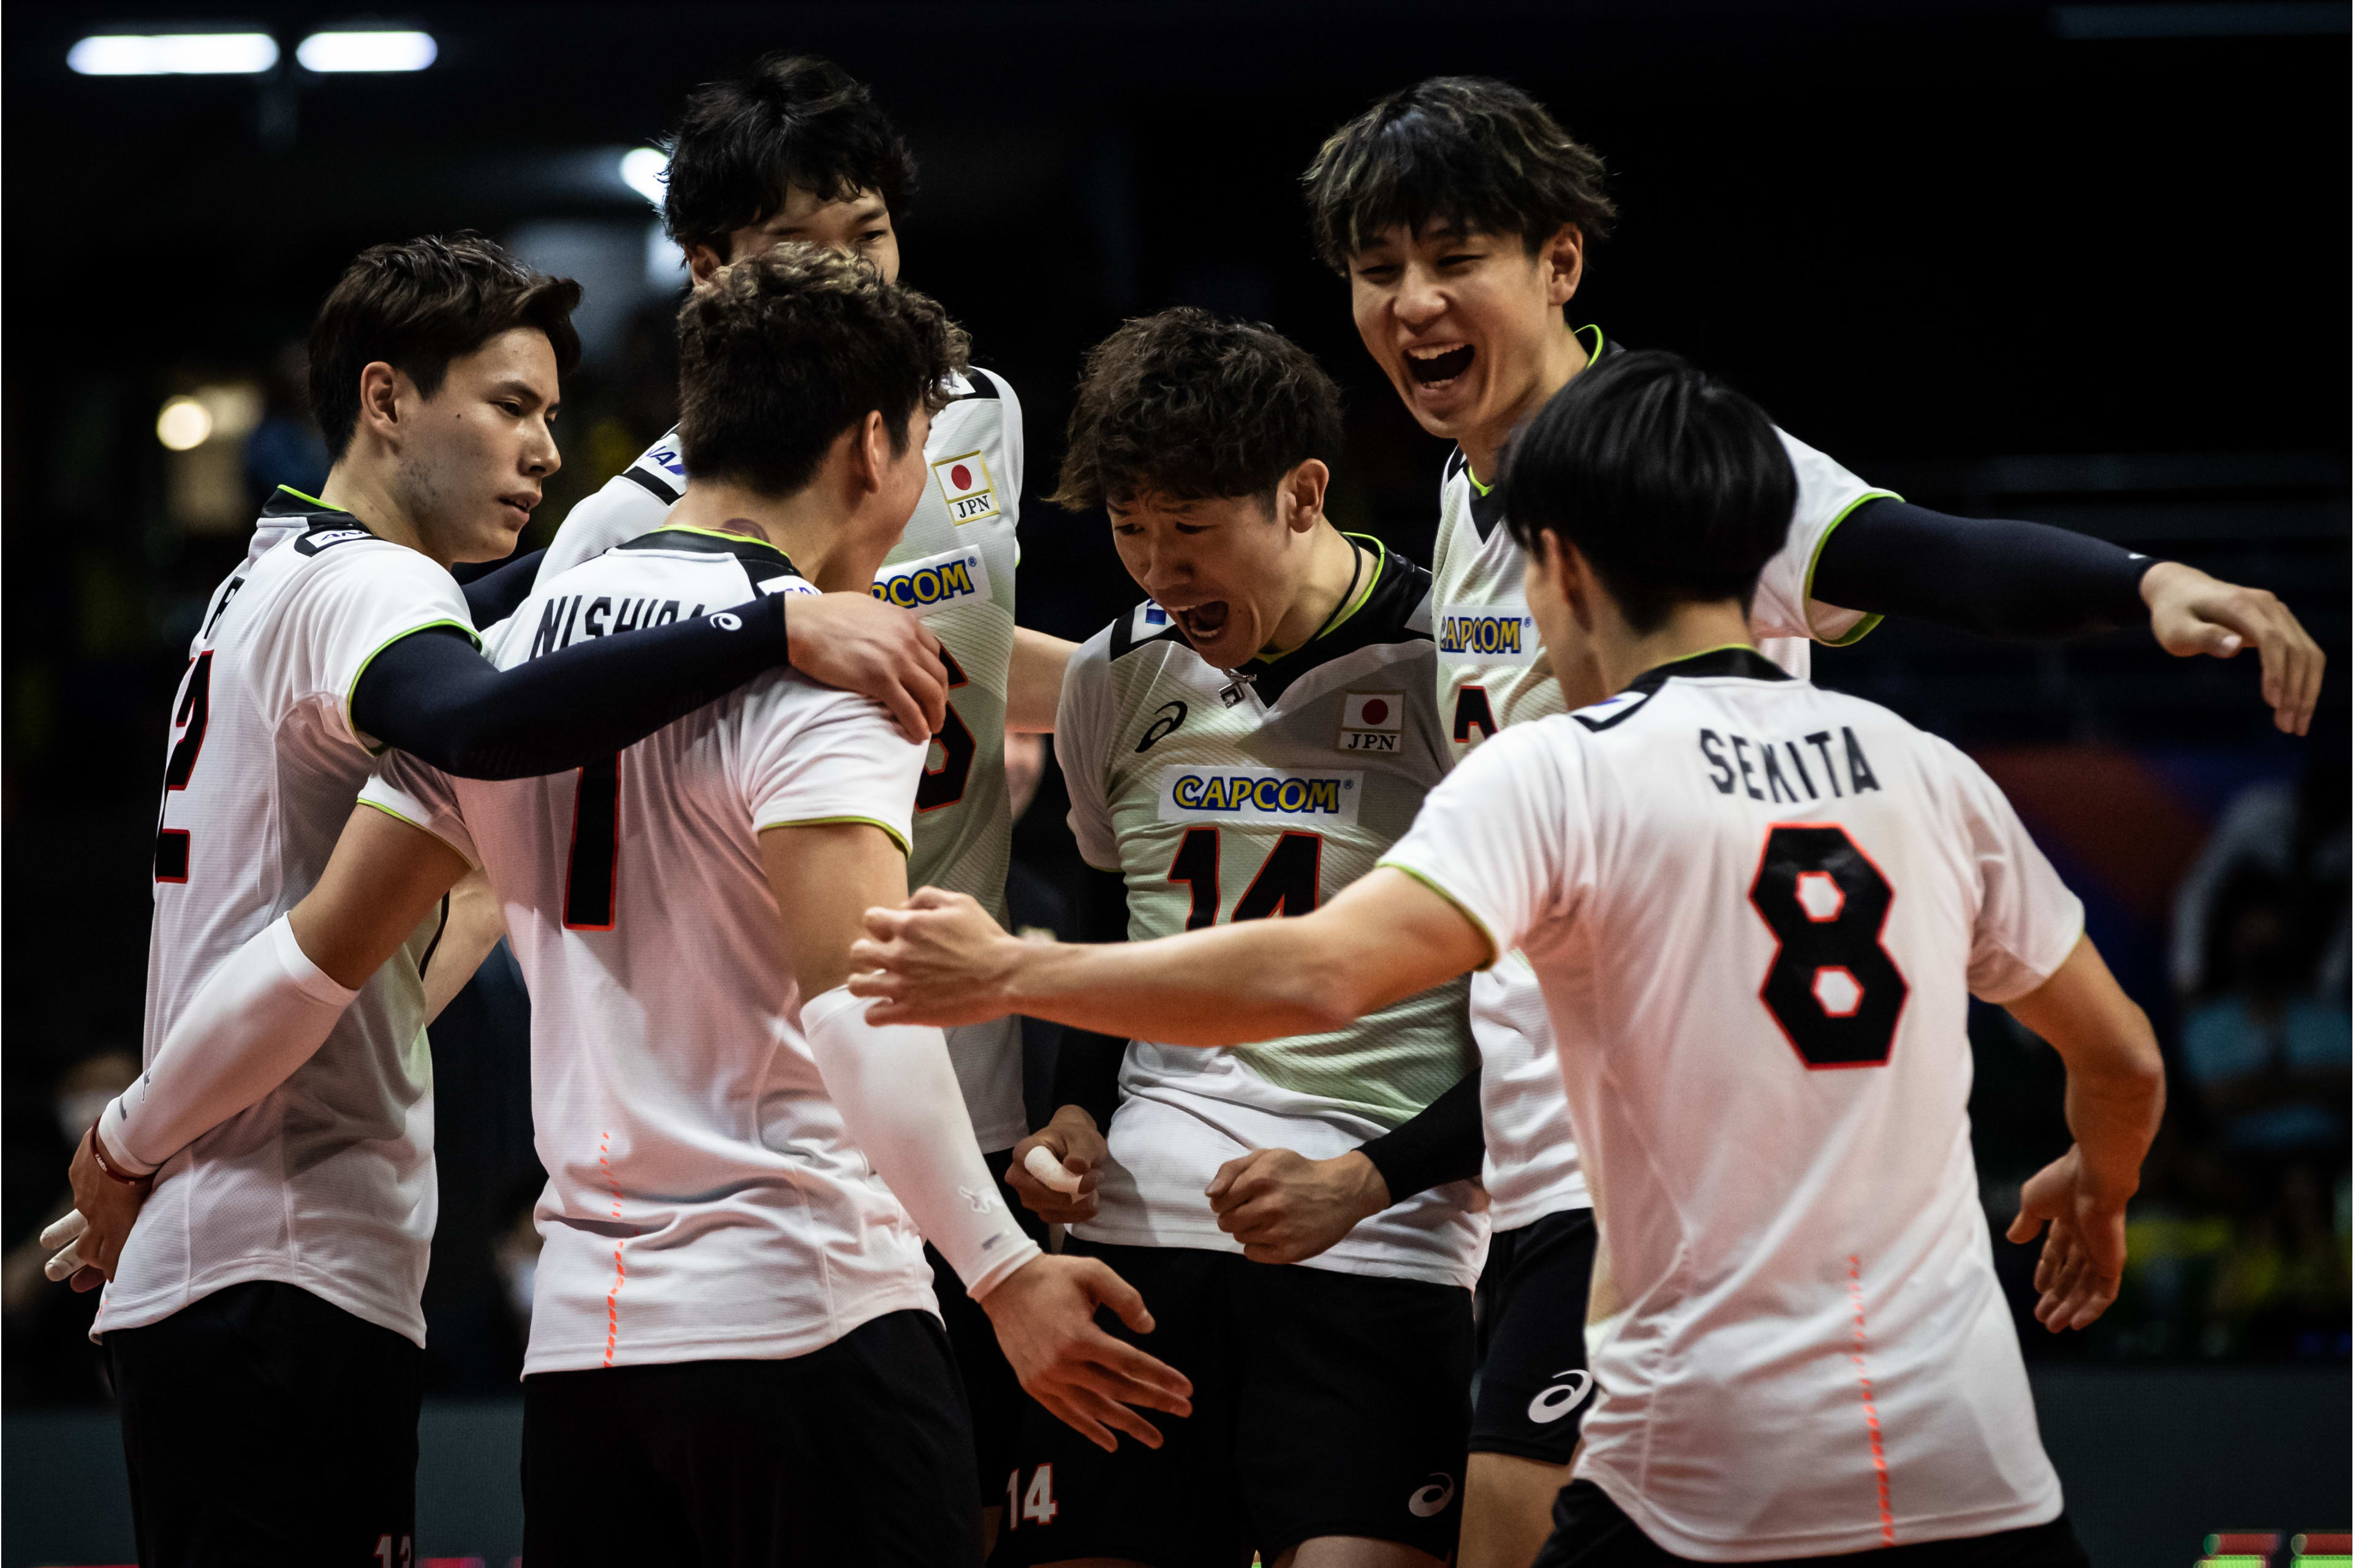 Volleyball World comes up trumps to land Stake partnership volleyballworld